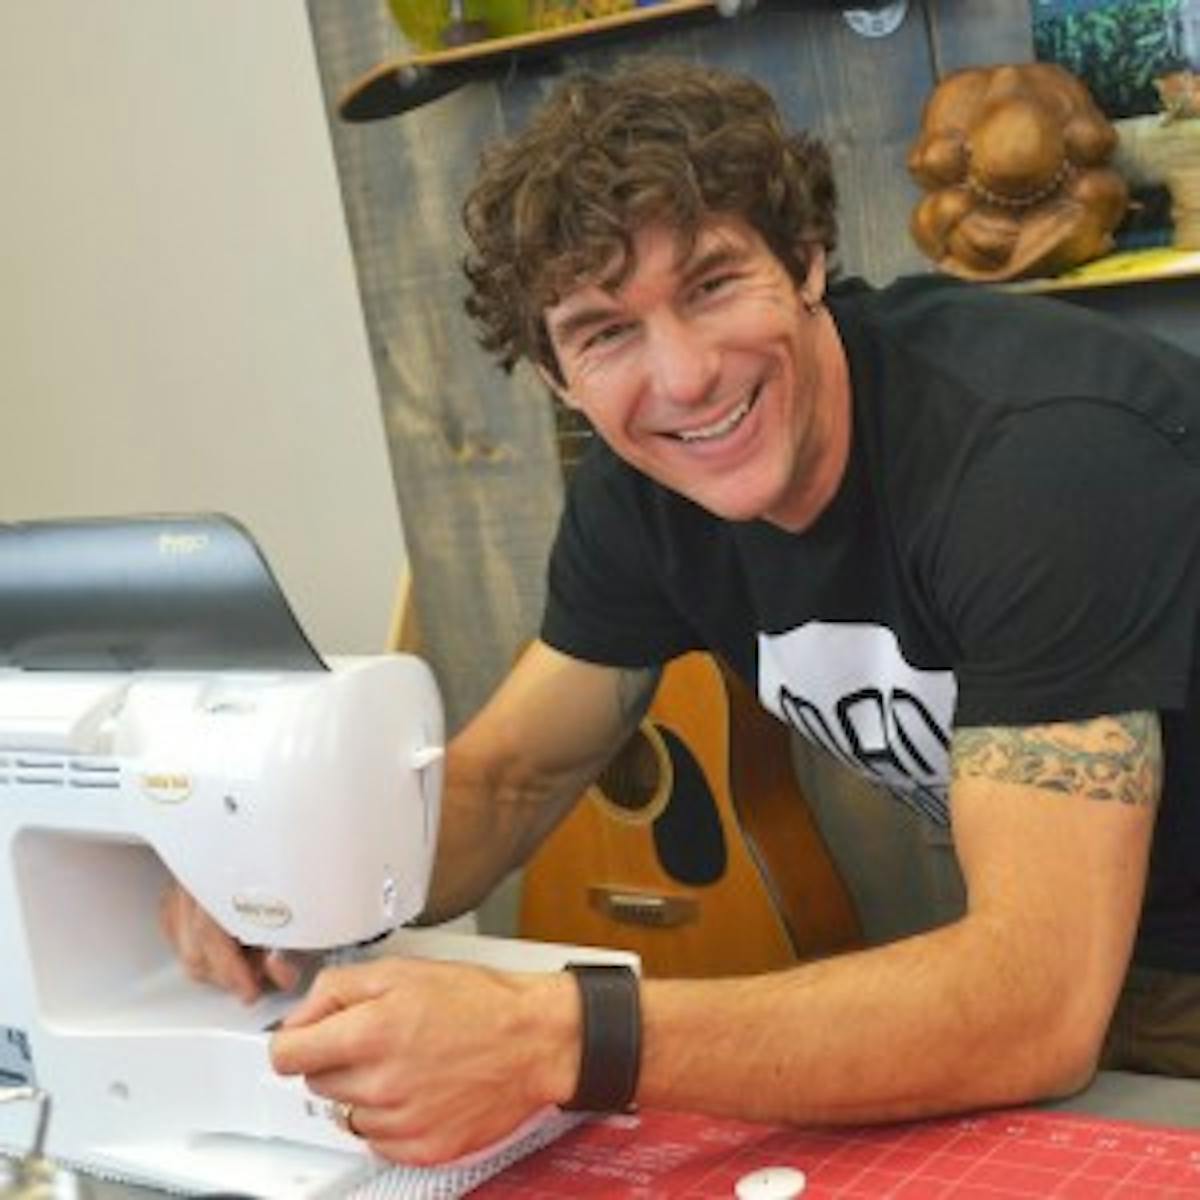  Rob Appell of Man Sewing